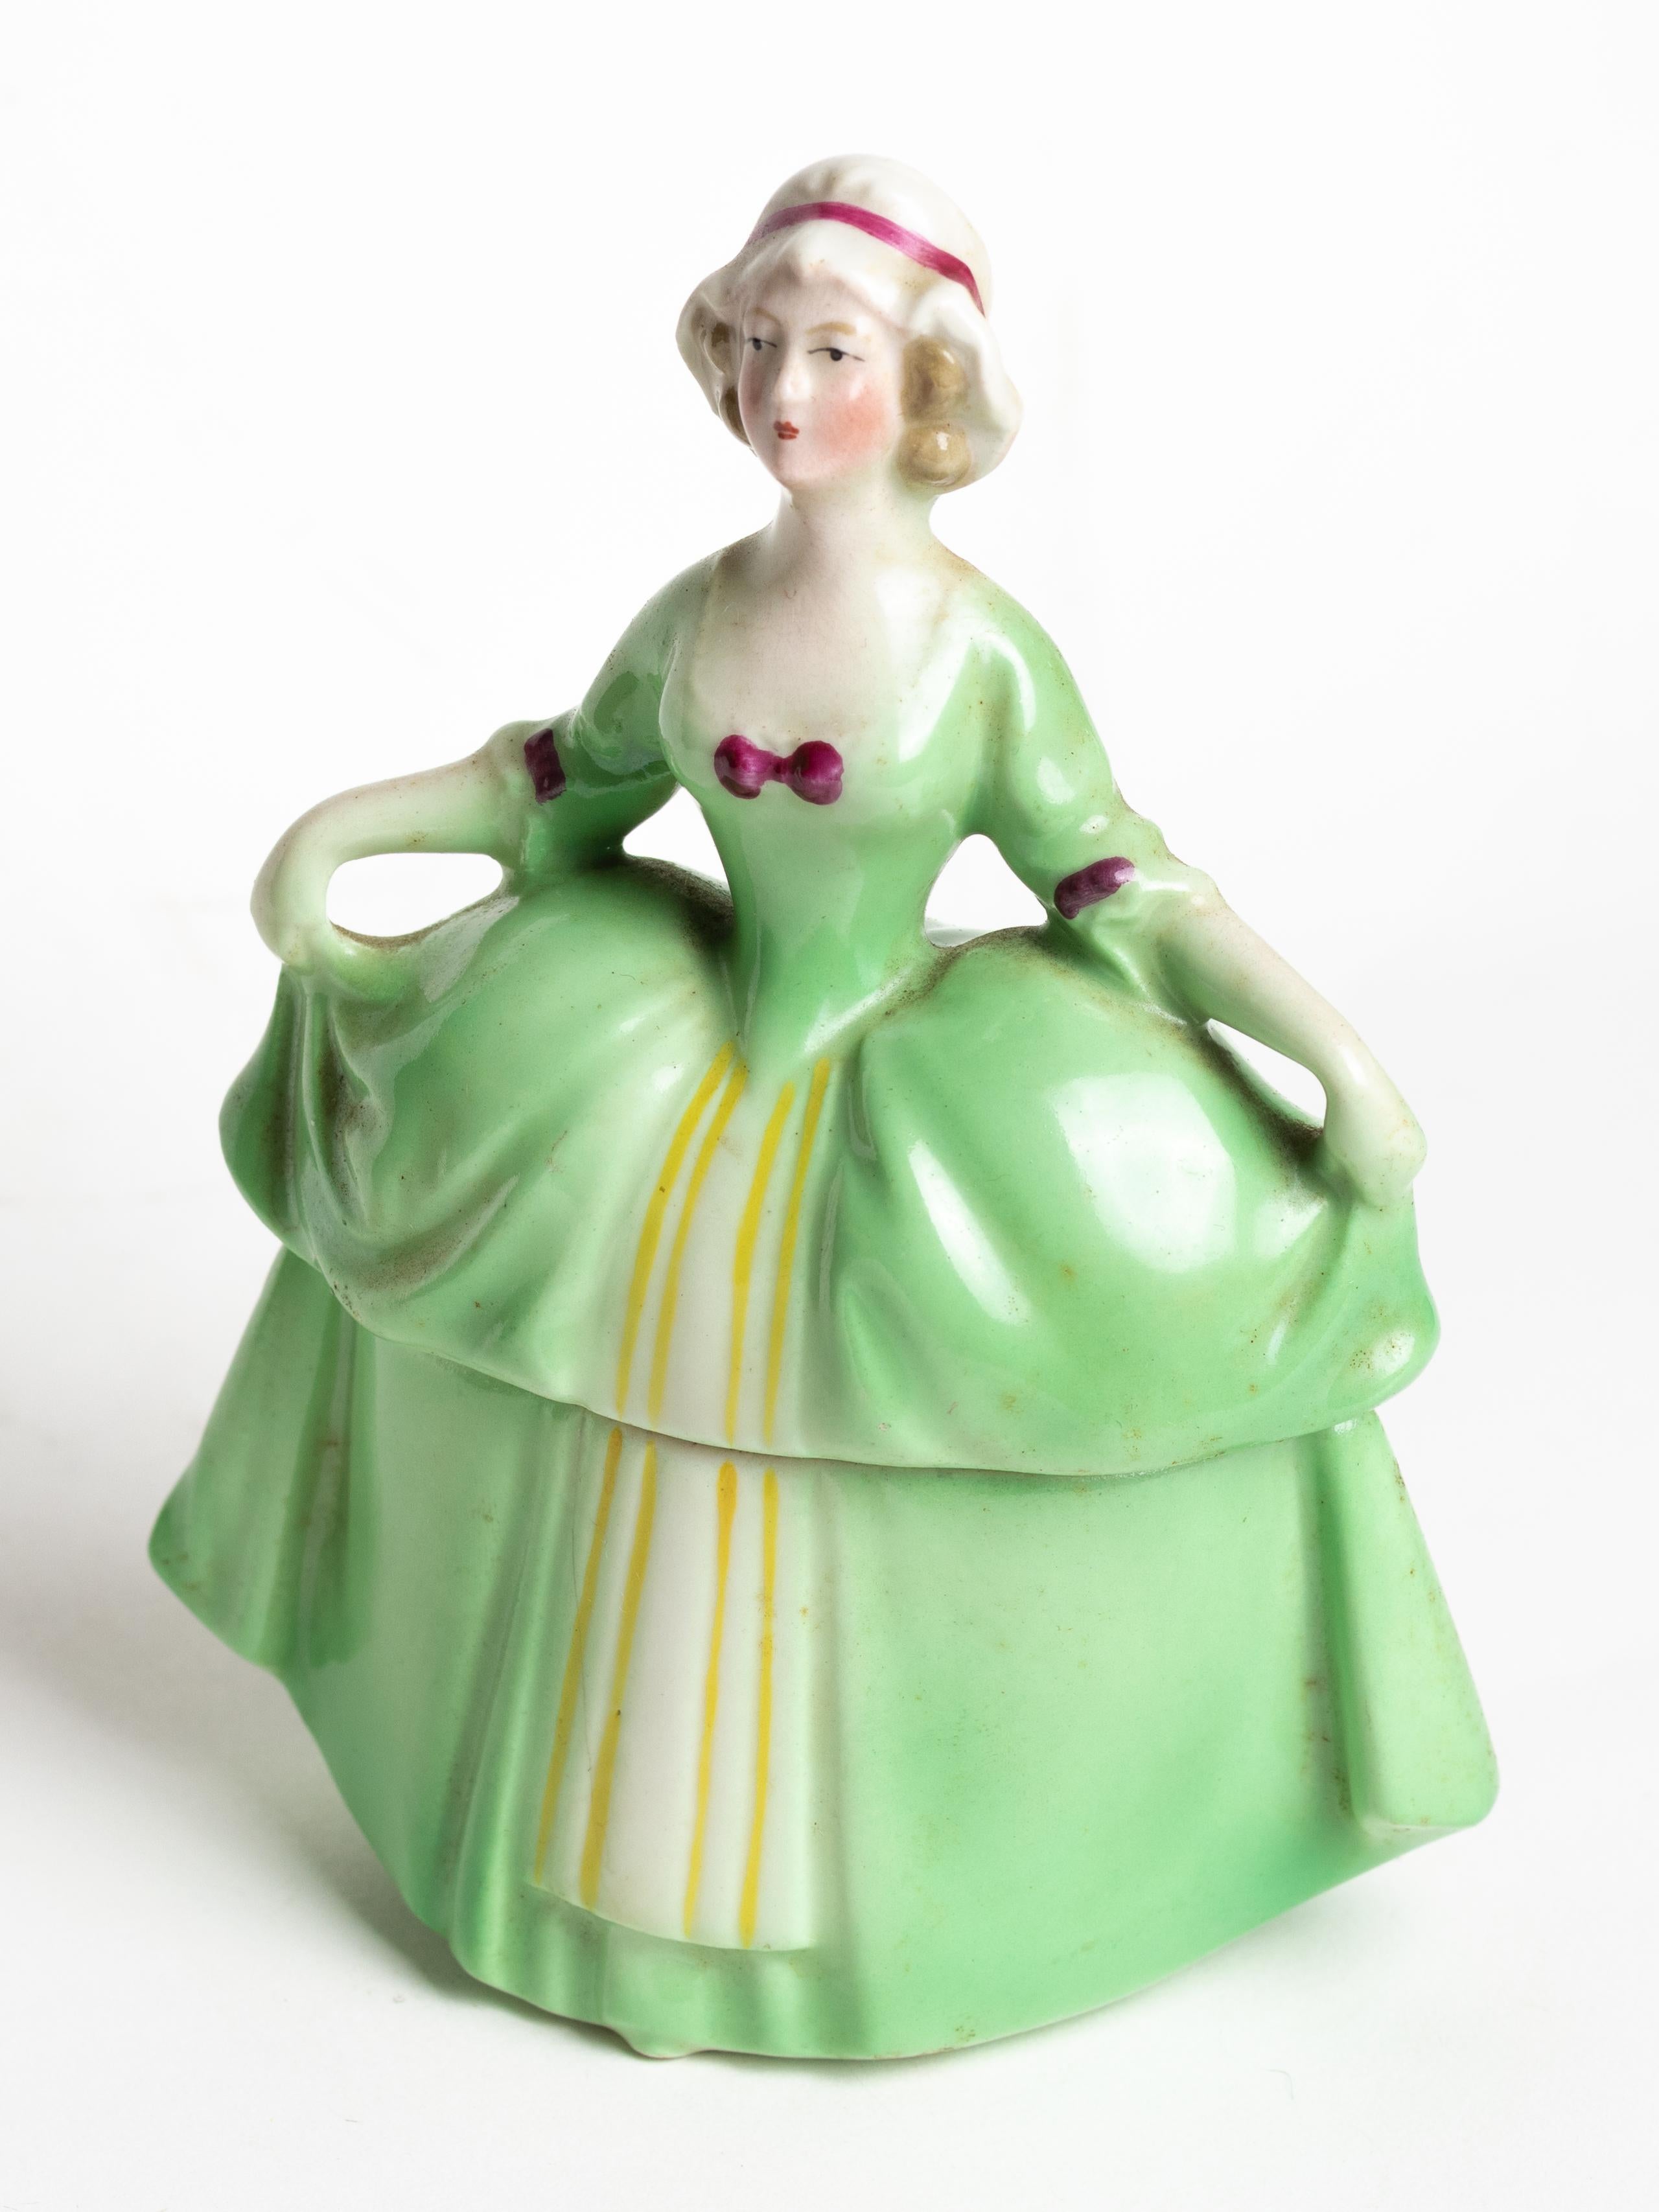 A Madame Pompadour E&R ceramic green dresser doll powder box or trinket box.
A Jewelry holder for vanity accessories or souvenirs.
Made in Bavaria by Schumann Arzberg Germany
Golden Crown E&R. 
